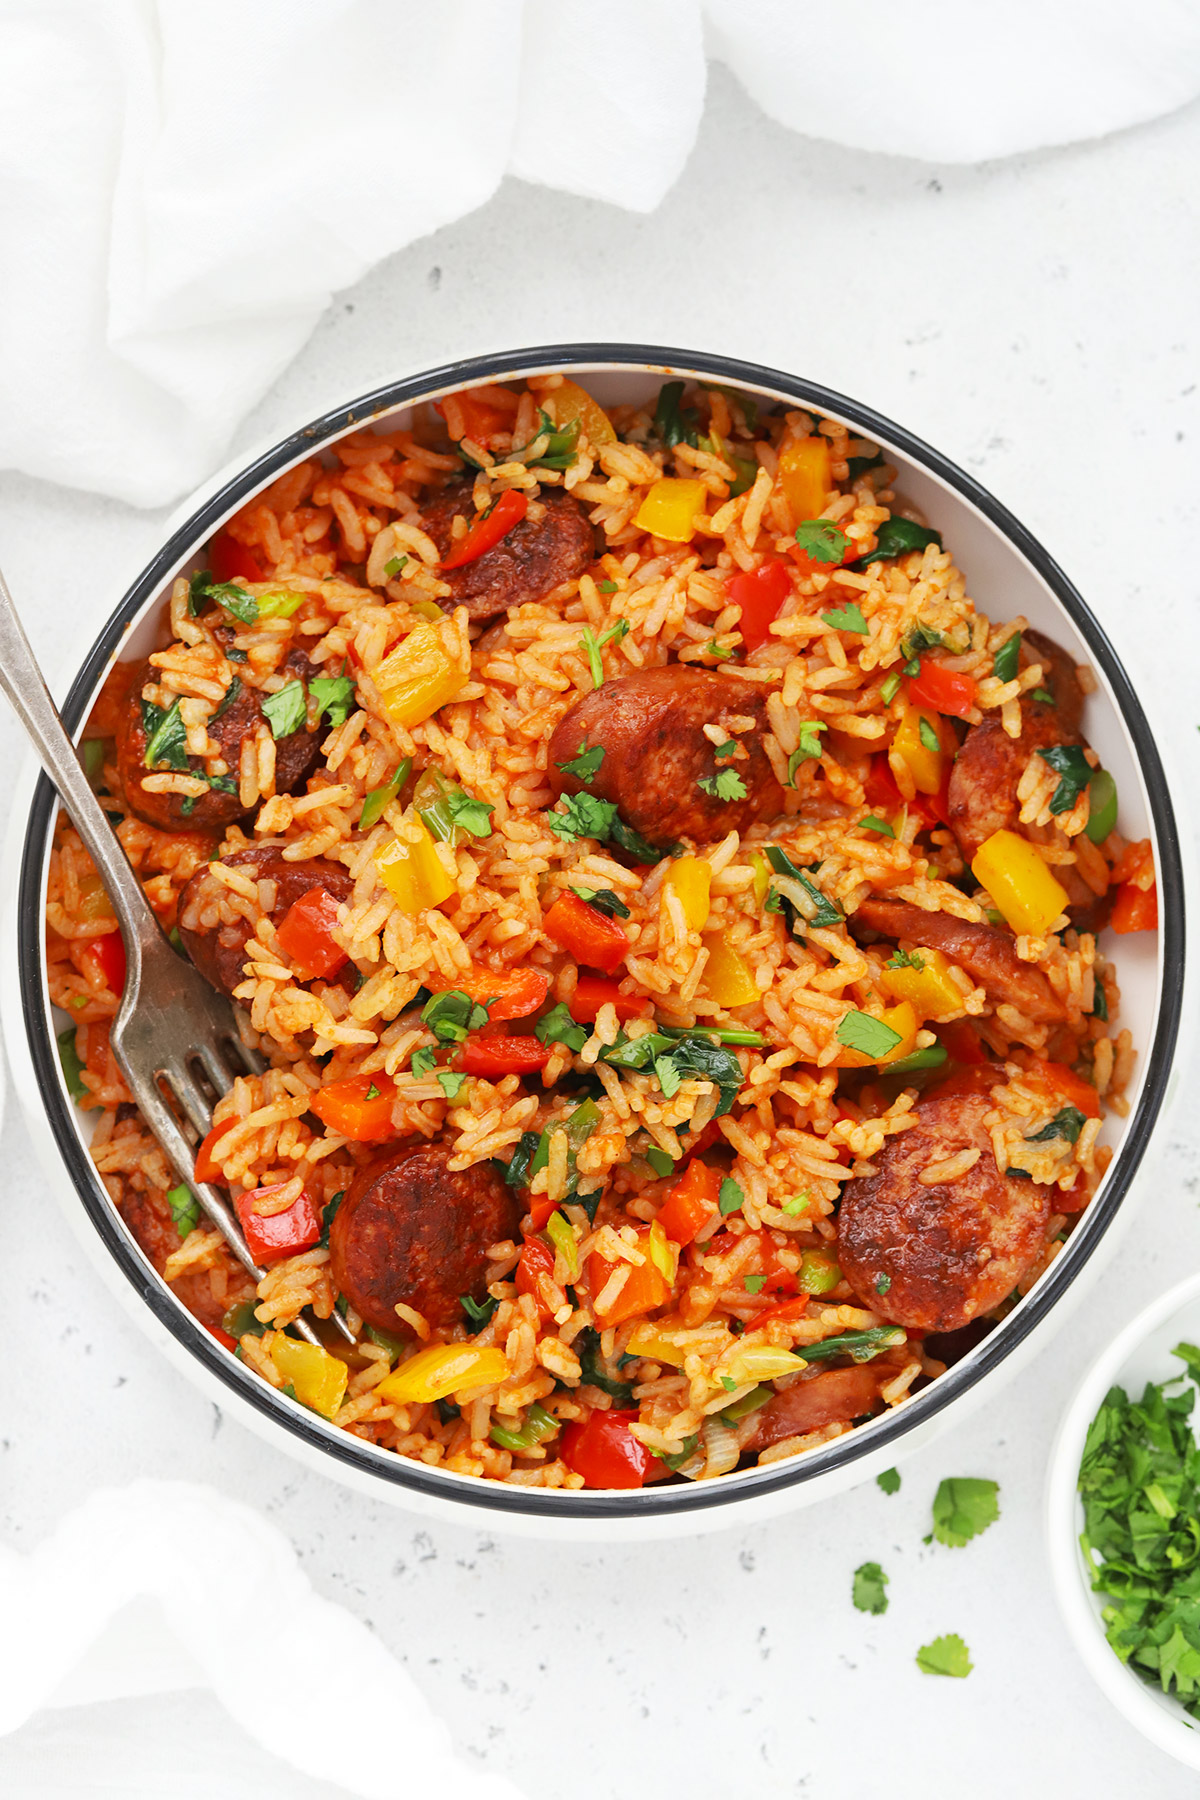 Overhead view of a bowl of Cajun Sausage and Rice Skillet on a white background